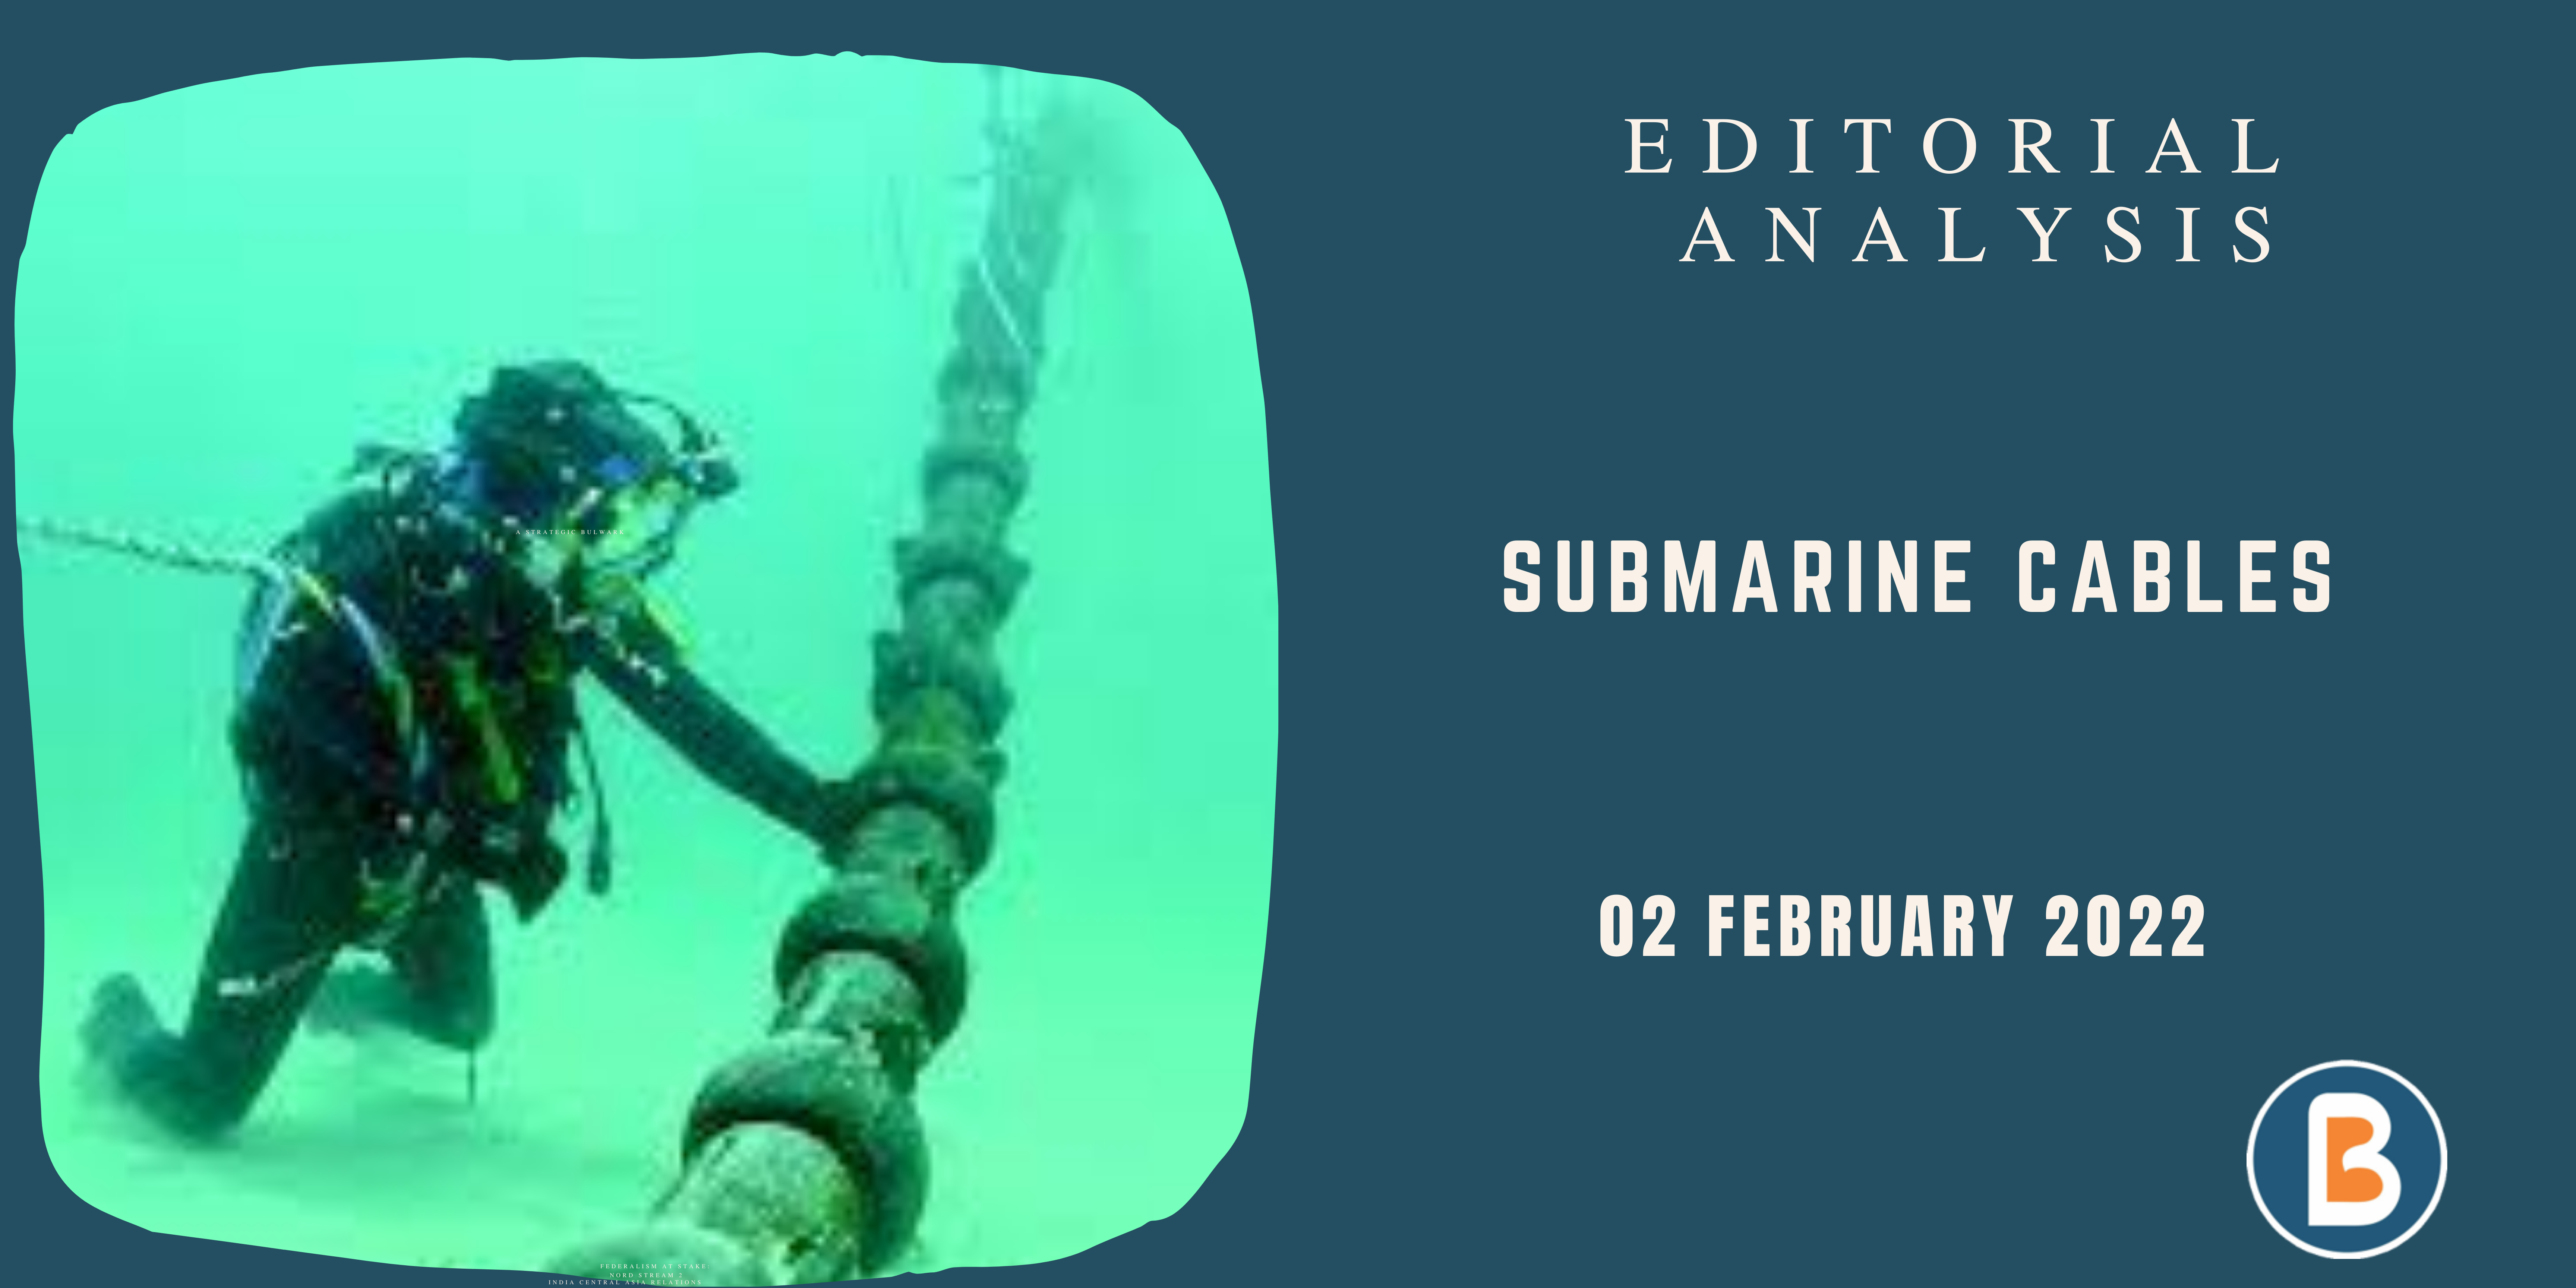 Editorial Analysis for UPSC - Submarine Cables